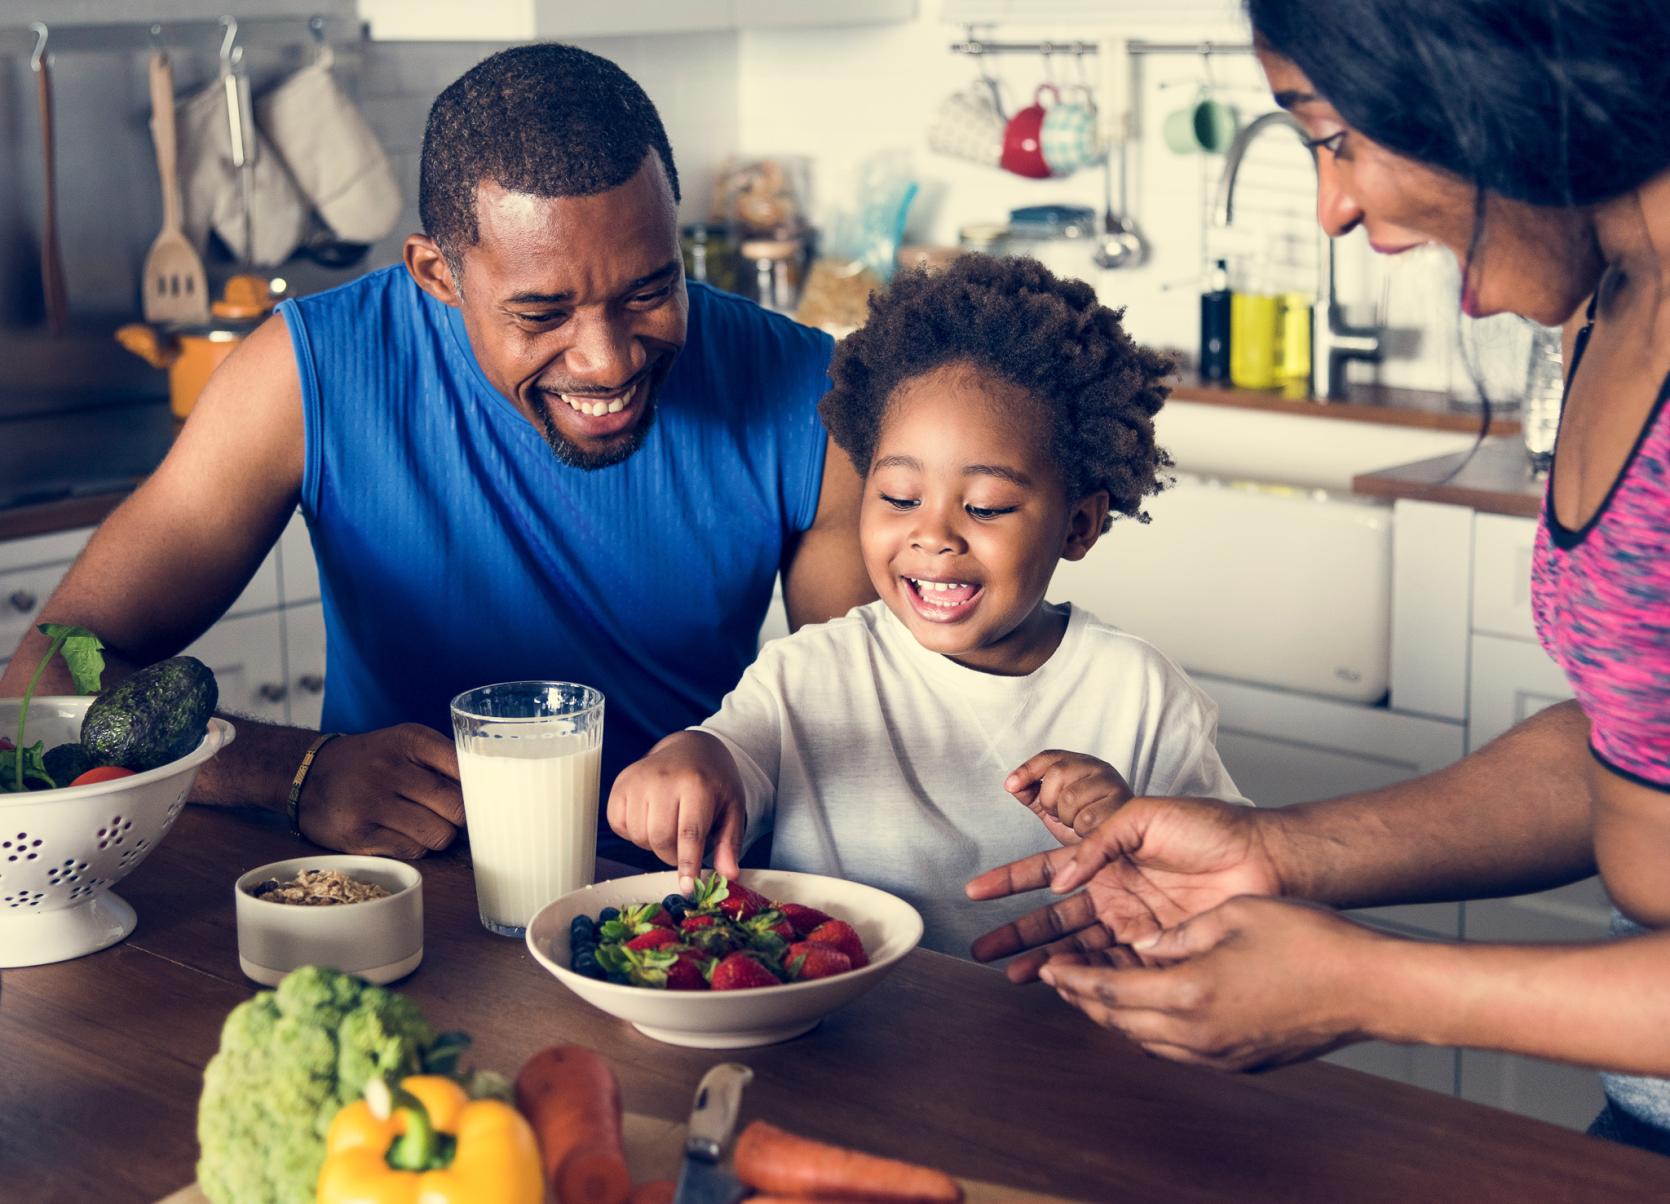 Image of family with young child sharing a healthy meal.